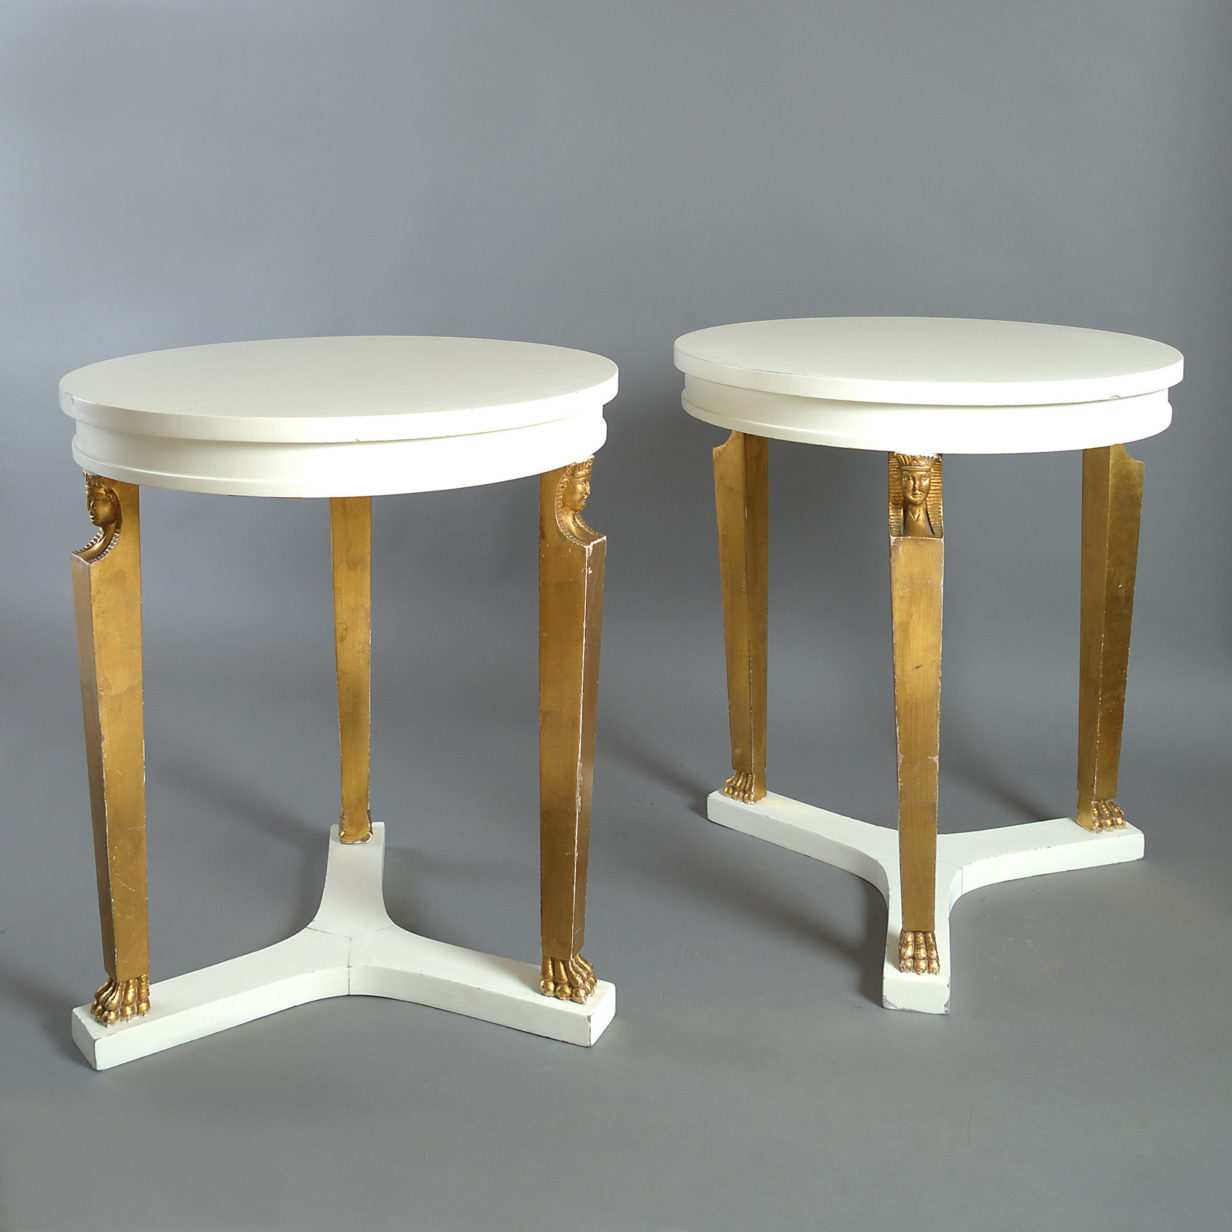 Mid-20th century pair of neo-classical circular end tables